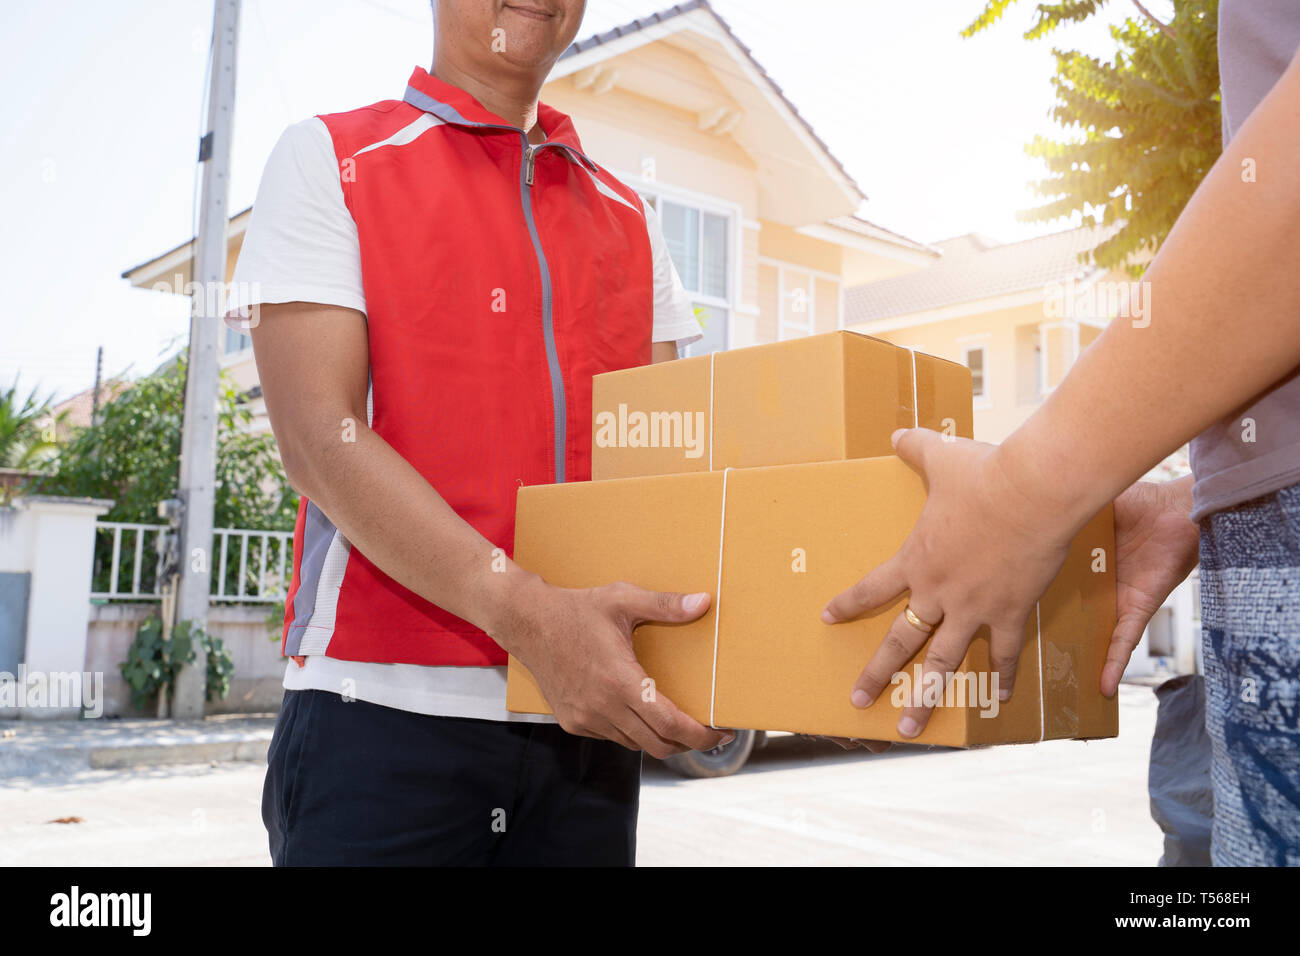 Delivery man in red uniform handing parcel boxes to recipient - courier service concept - Image Stock Photo